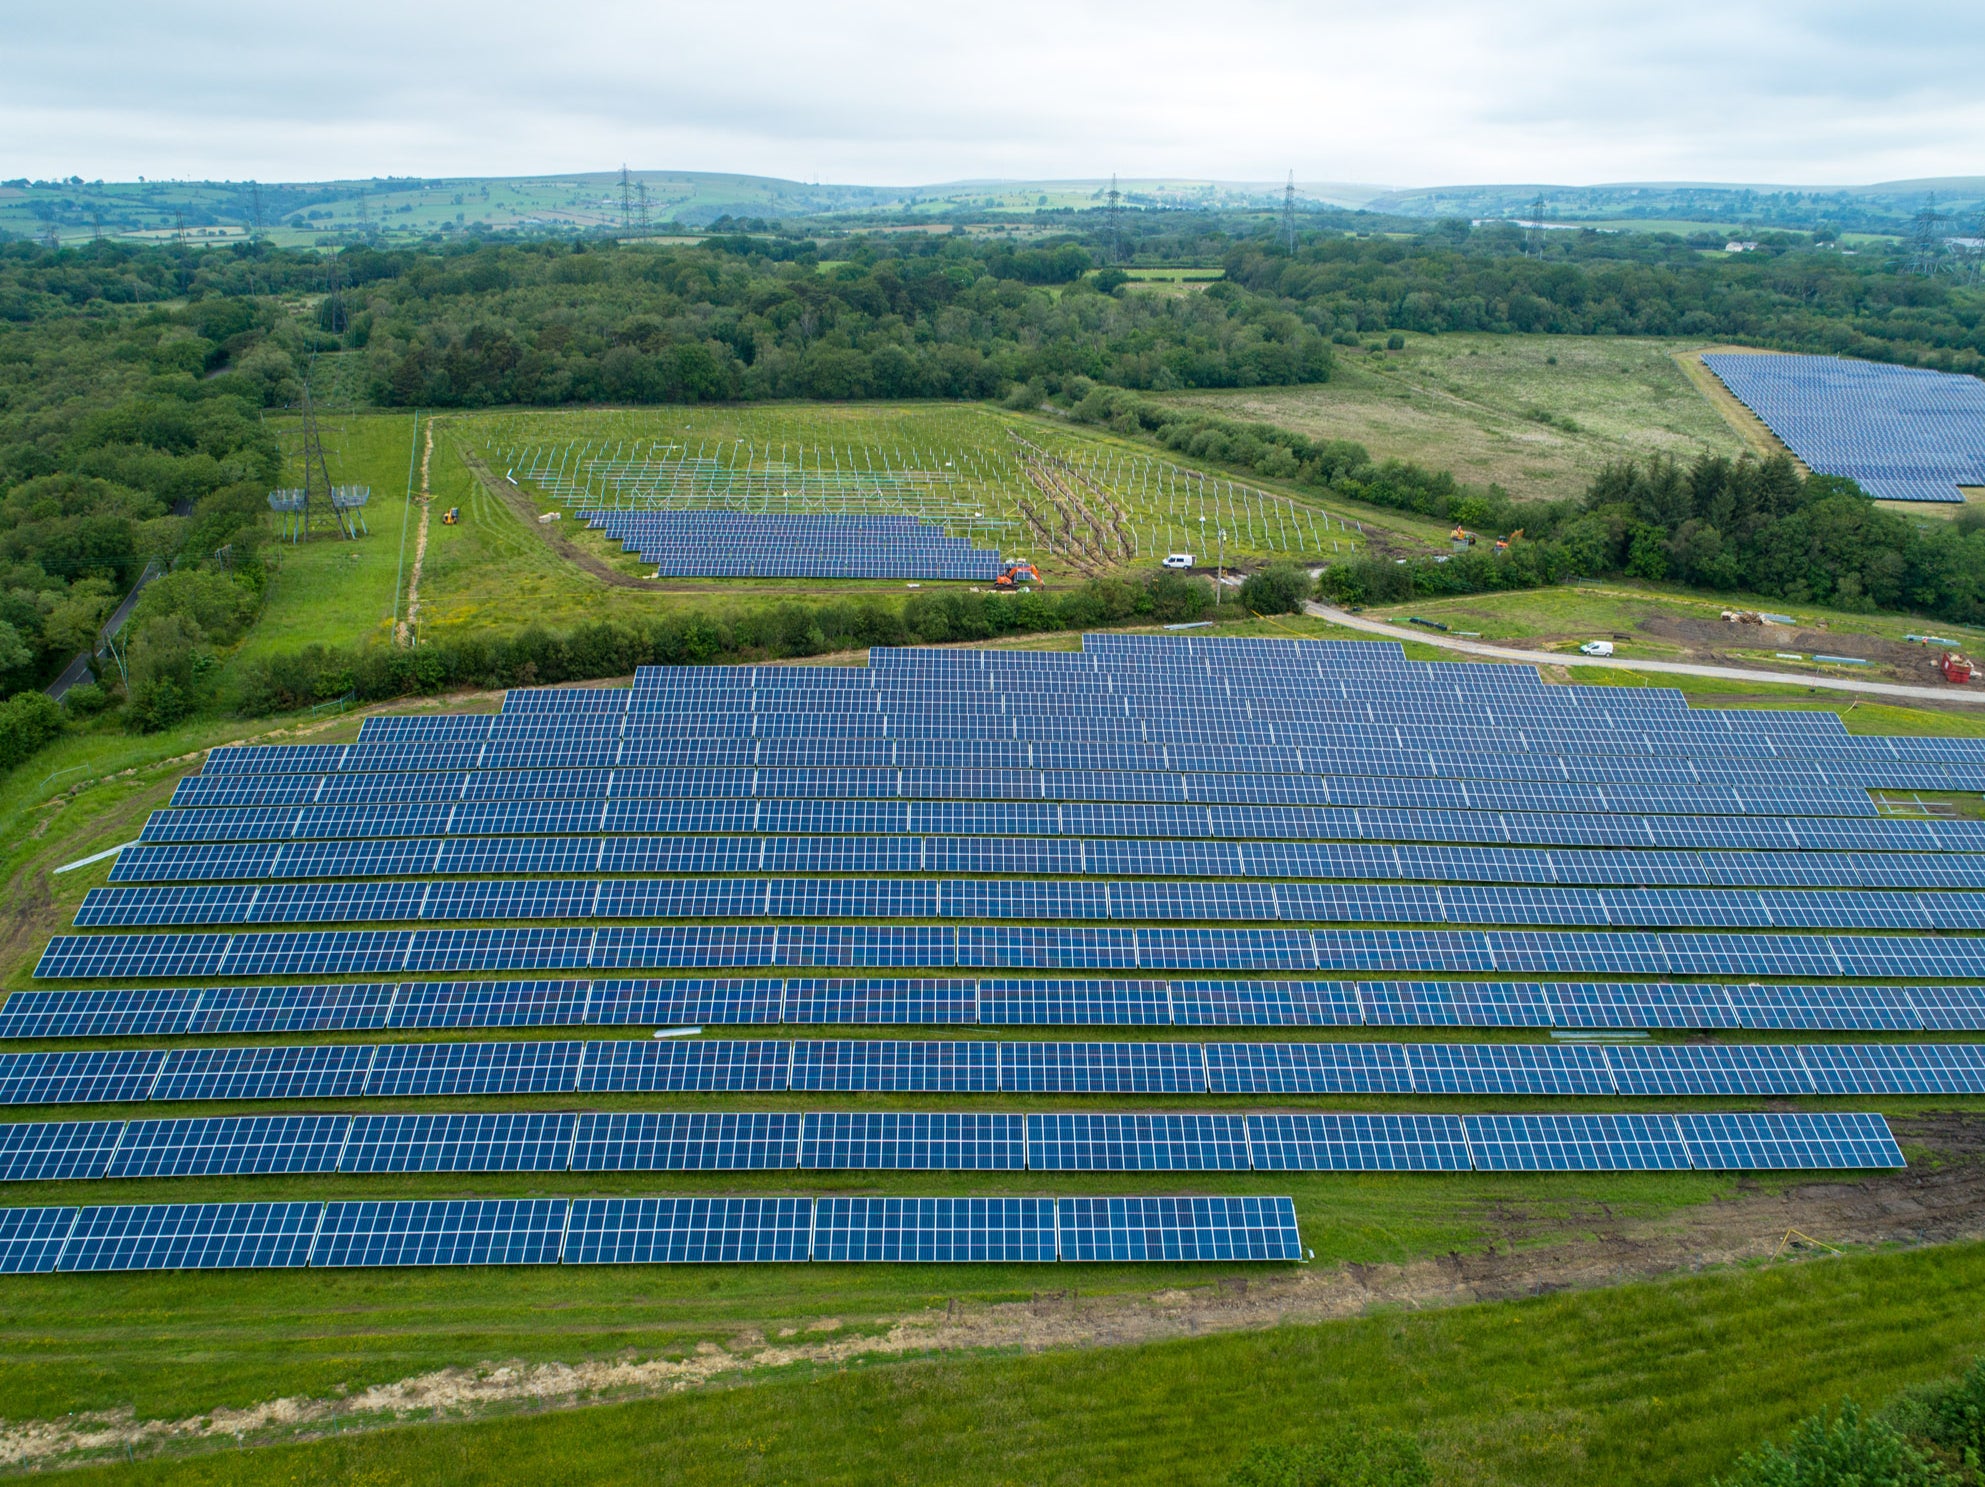 Morriston solar farm has exceeded intial expectations for its impact on energy needs of Swansea hospital